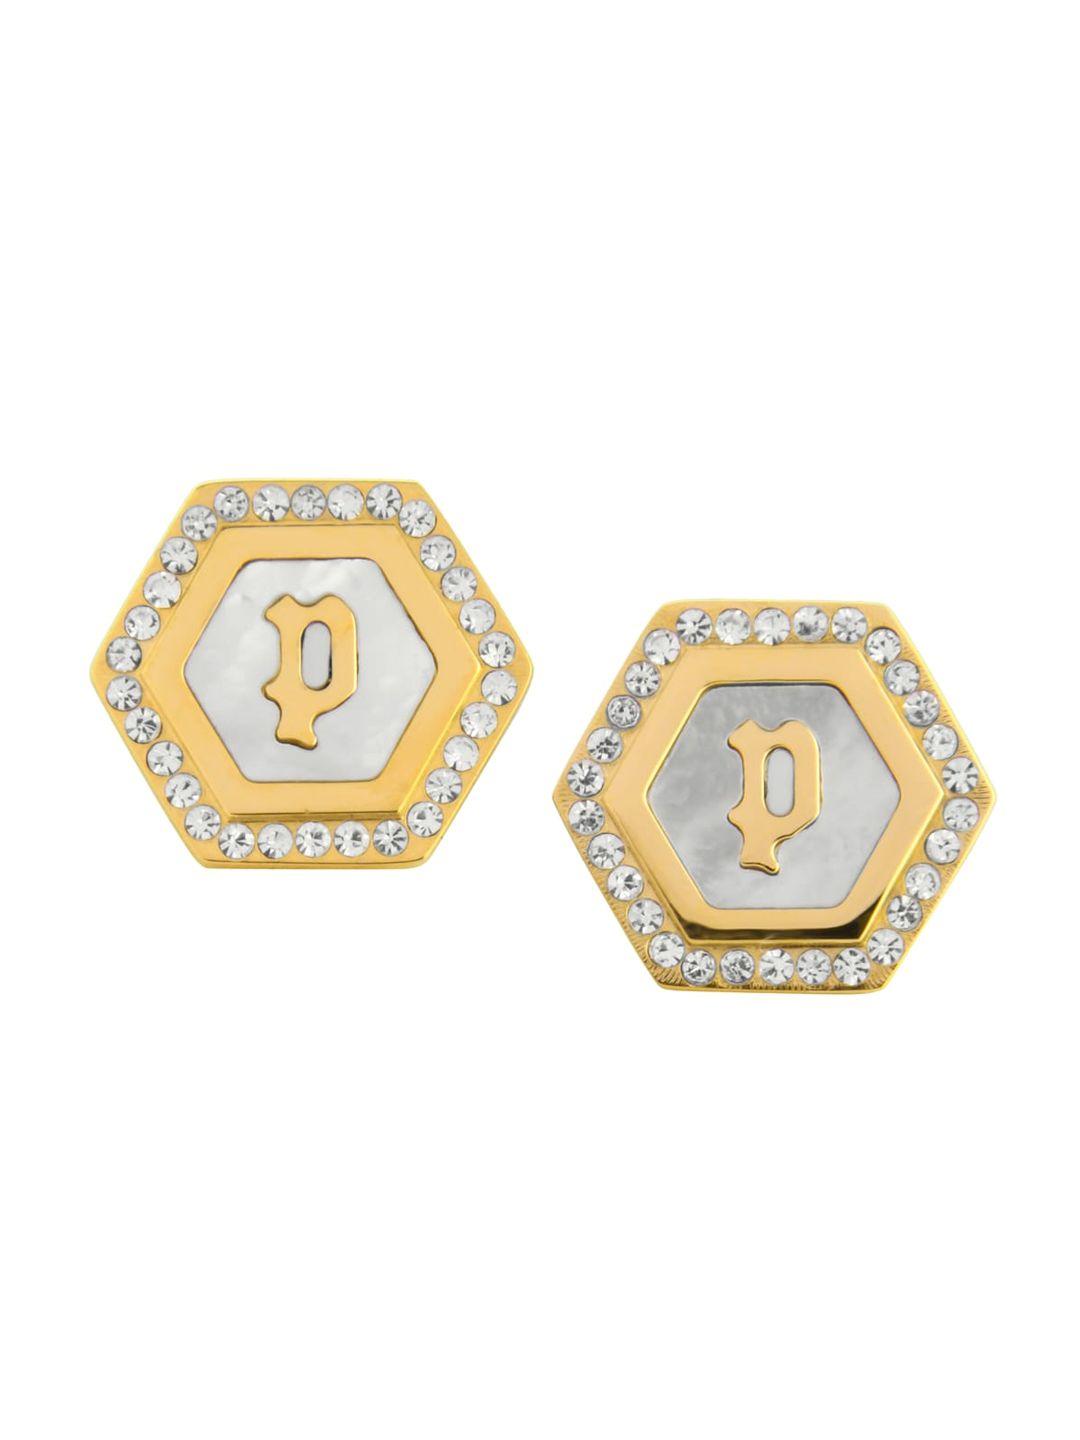 police gold-toned contemporary studs earrings